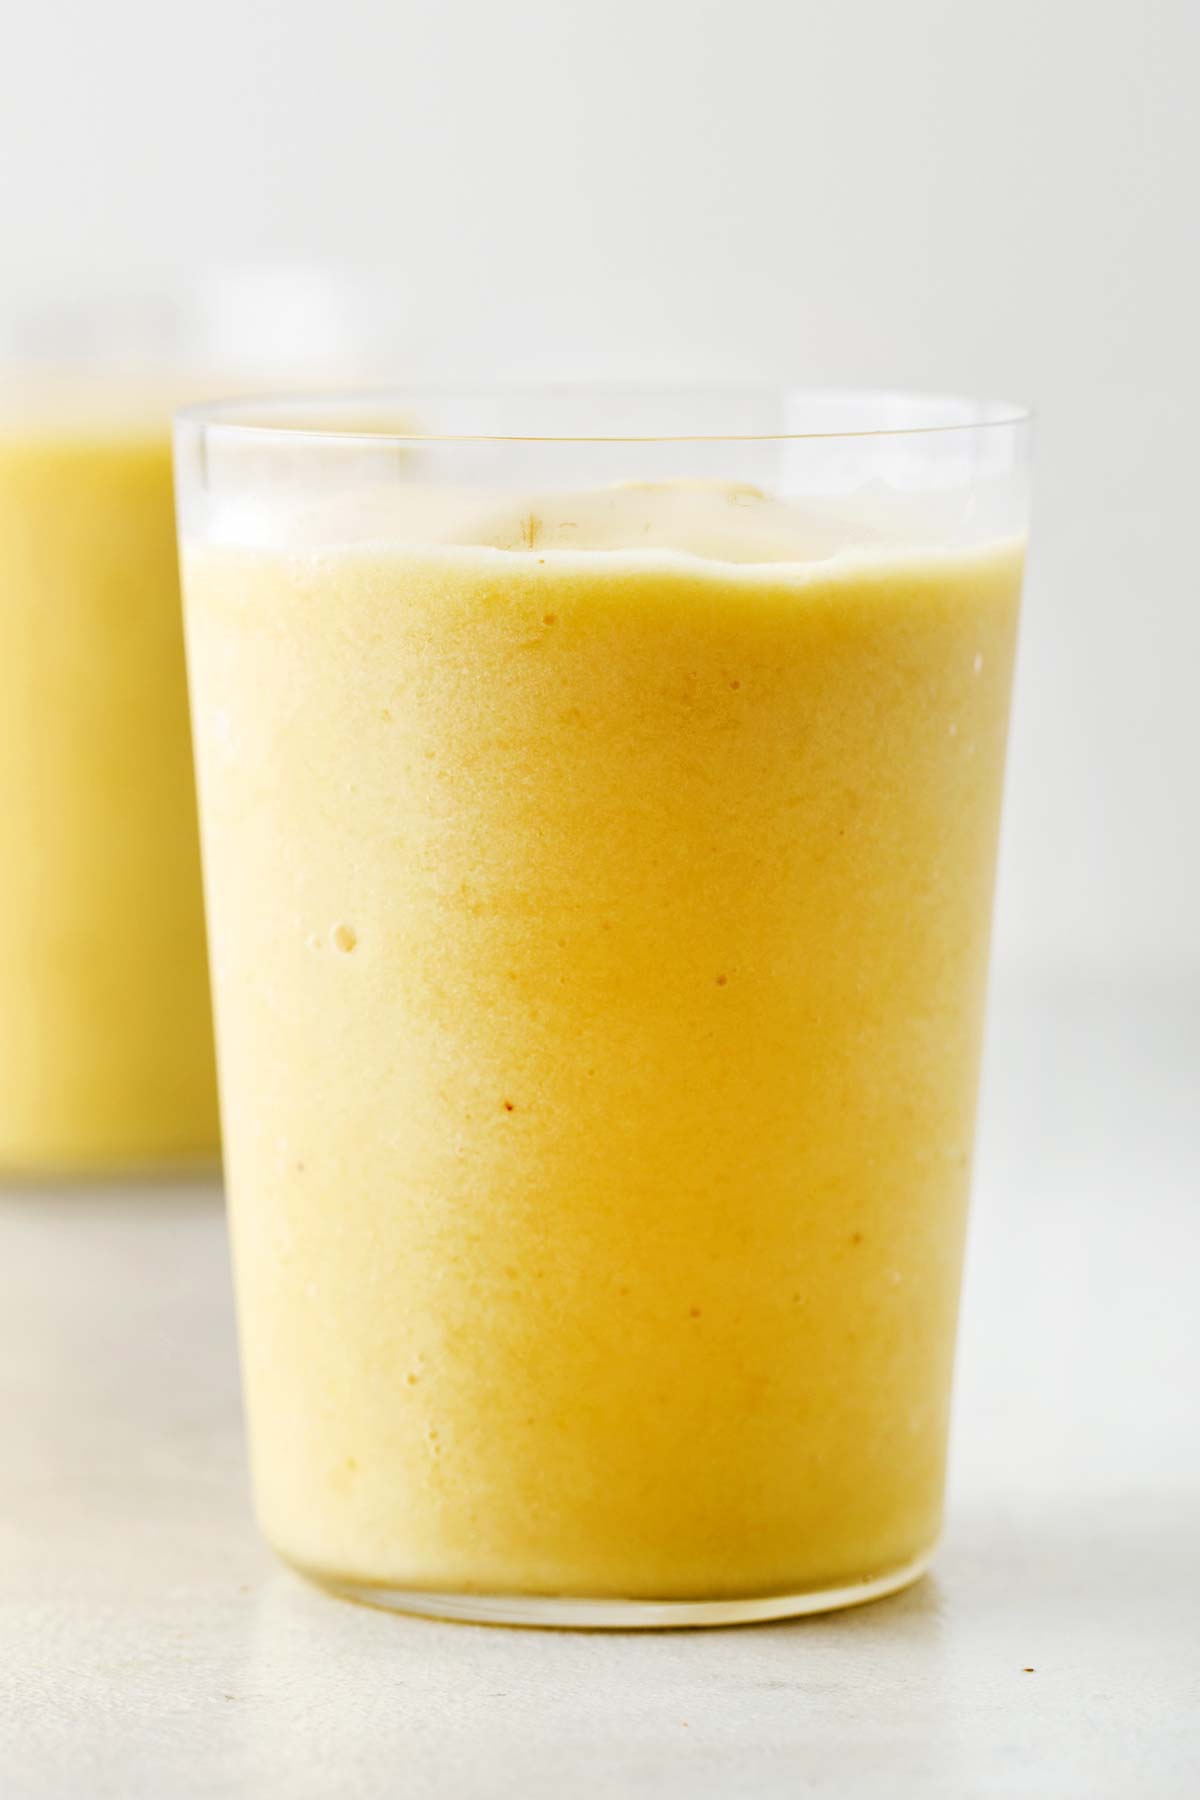 Pineapple smoothie in a glass.